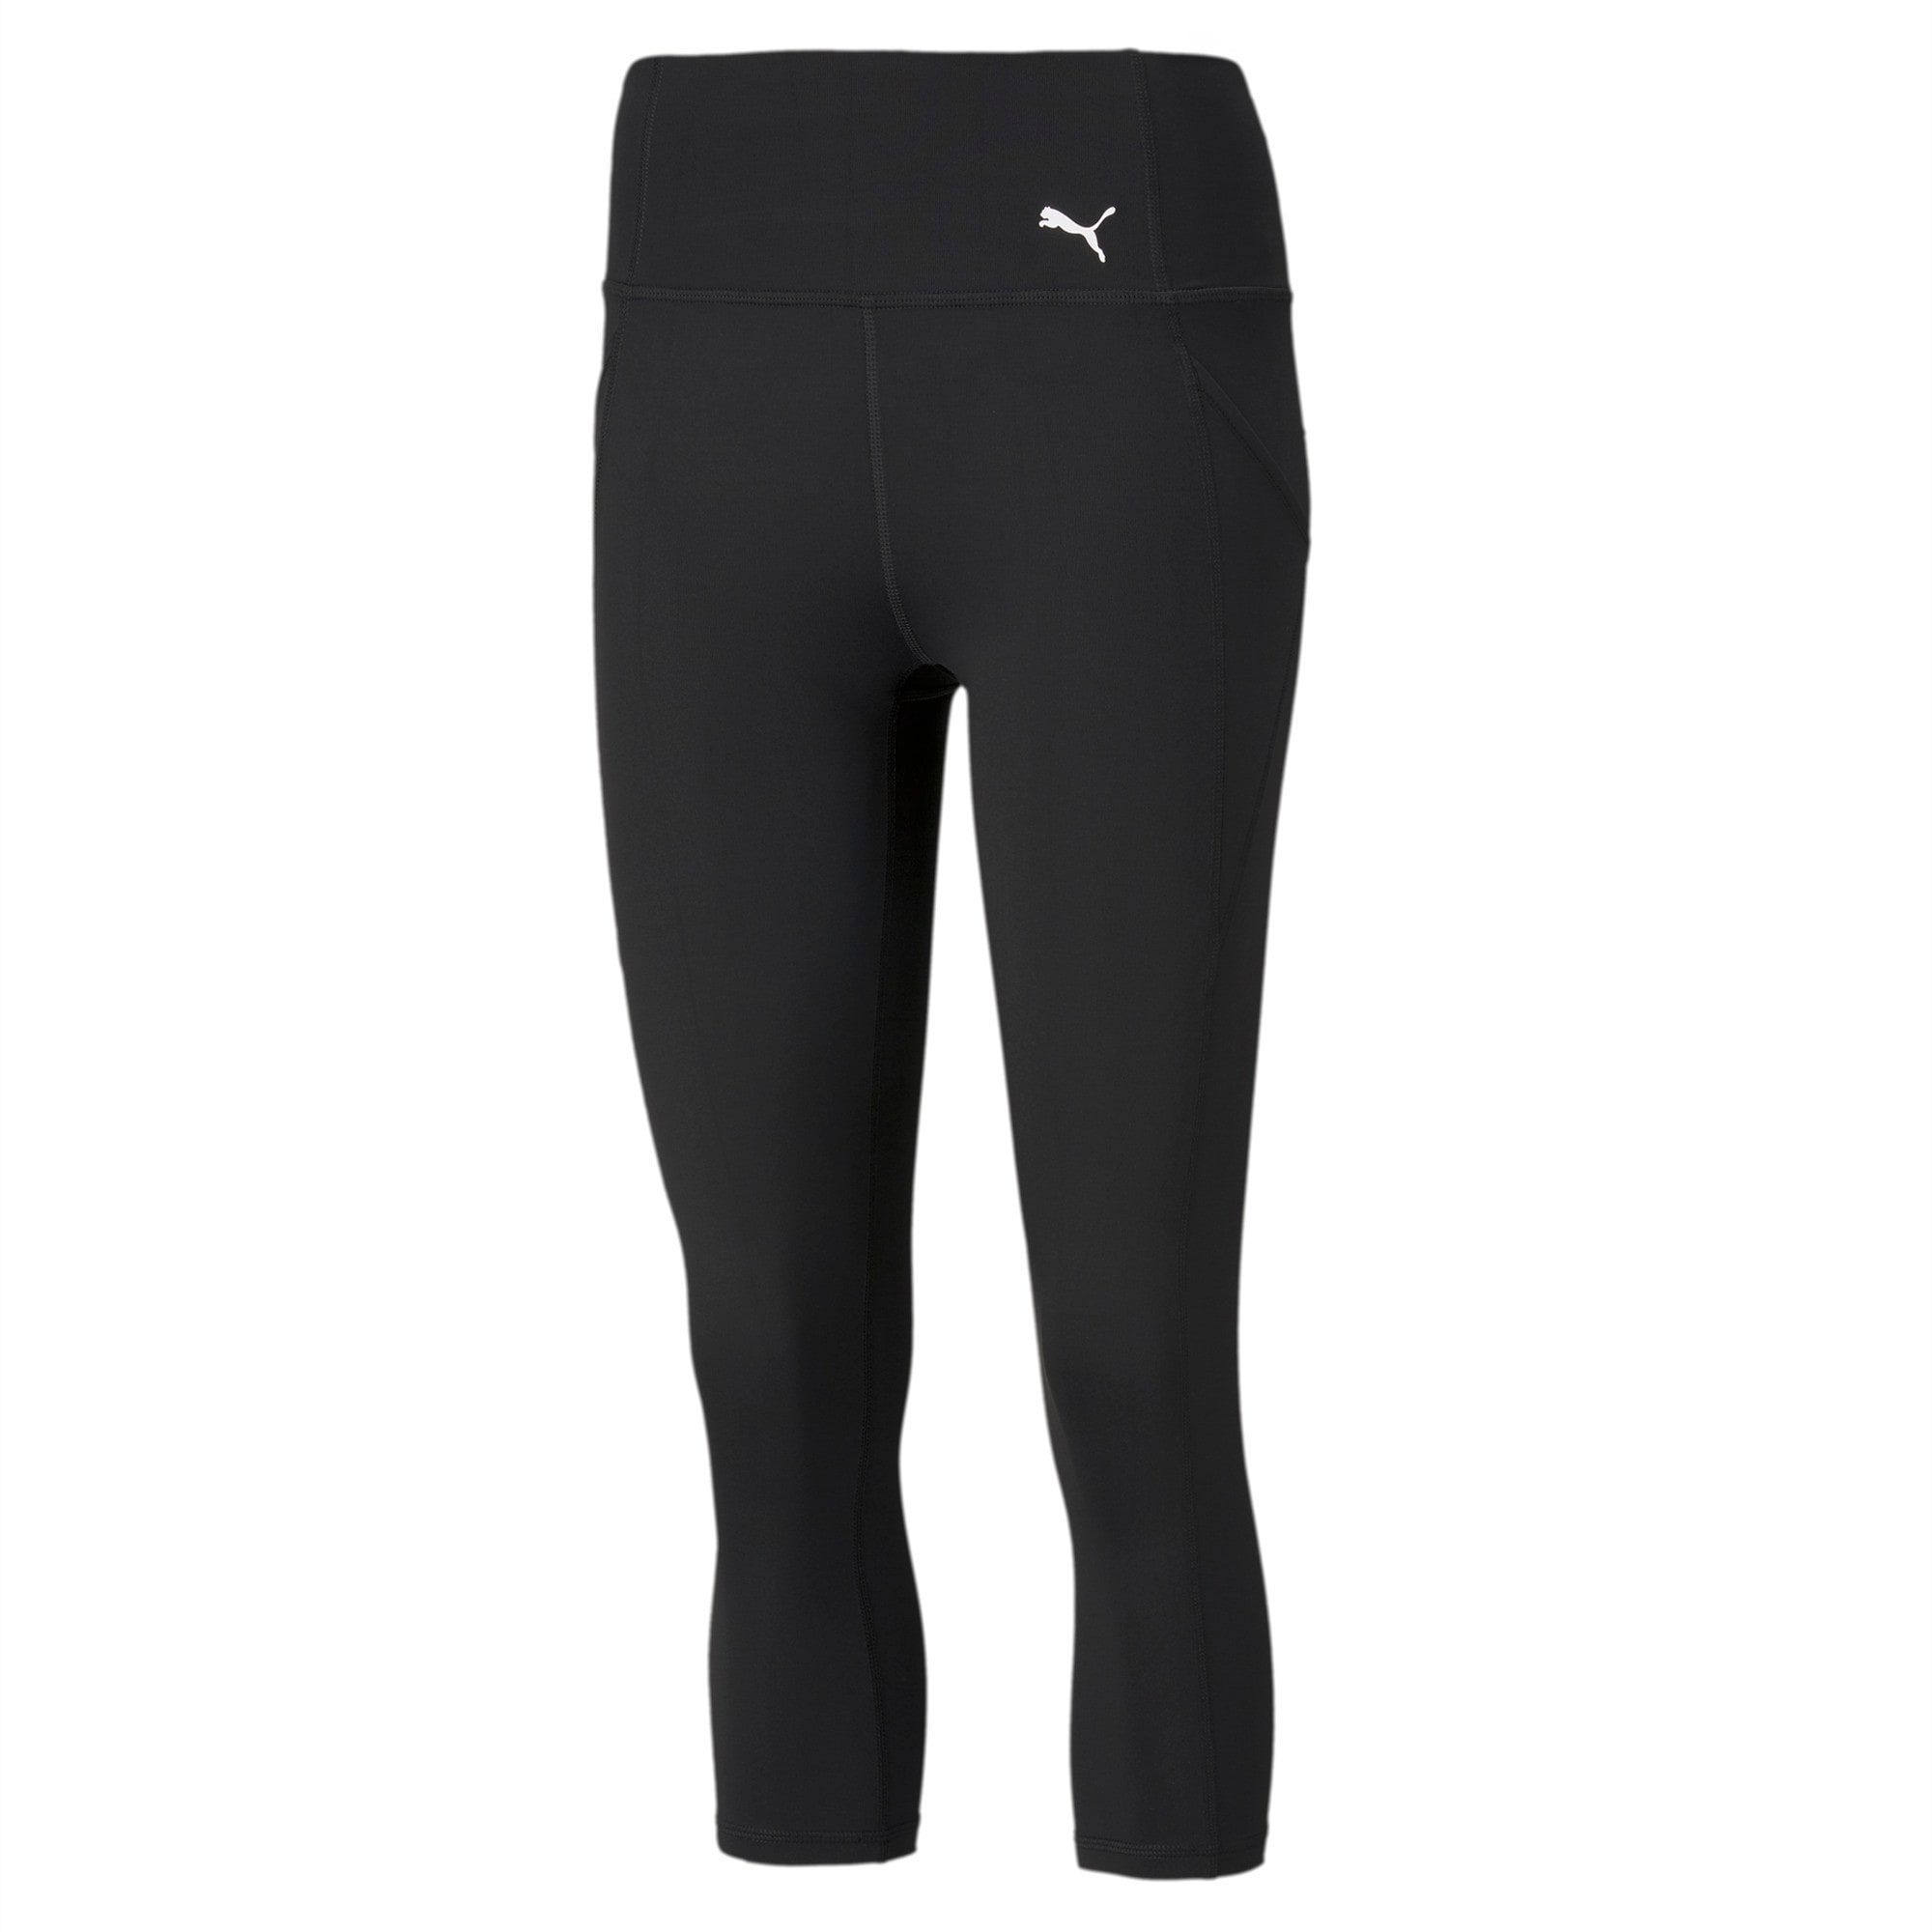 Women's 3/4 training leggings with recycled materials